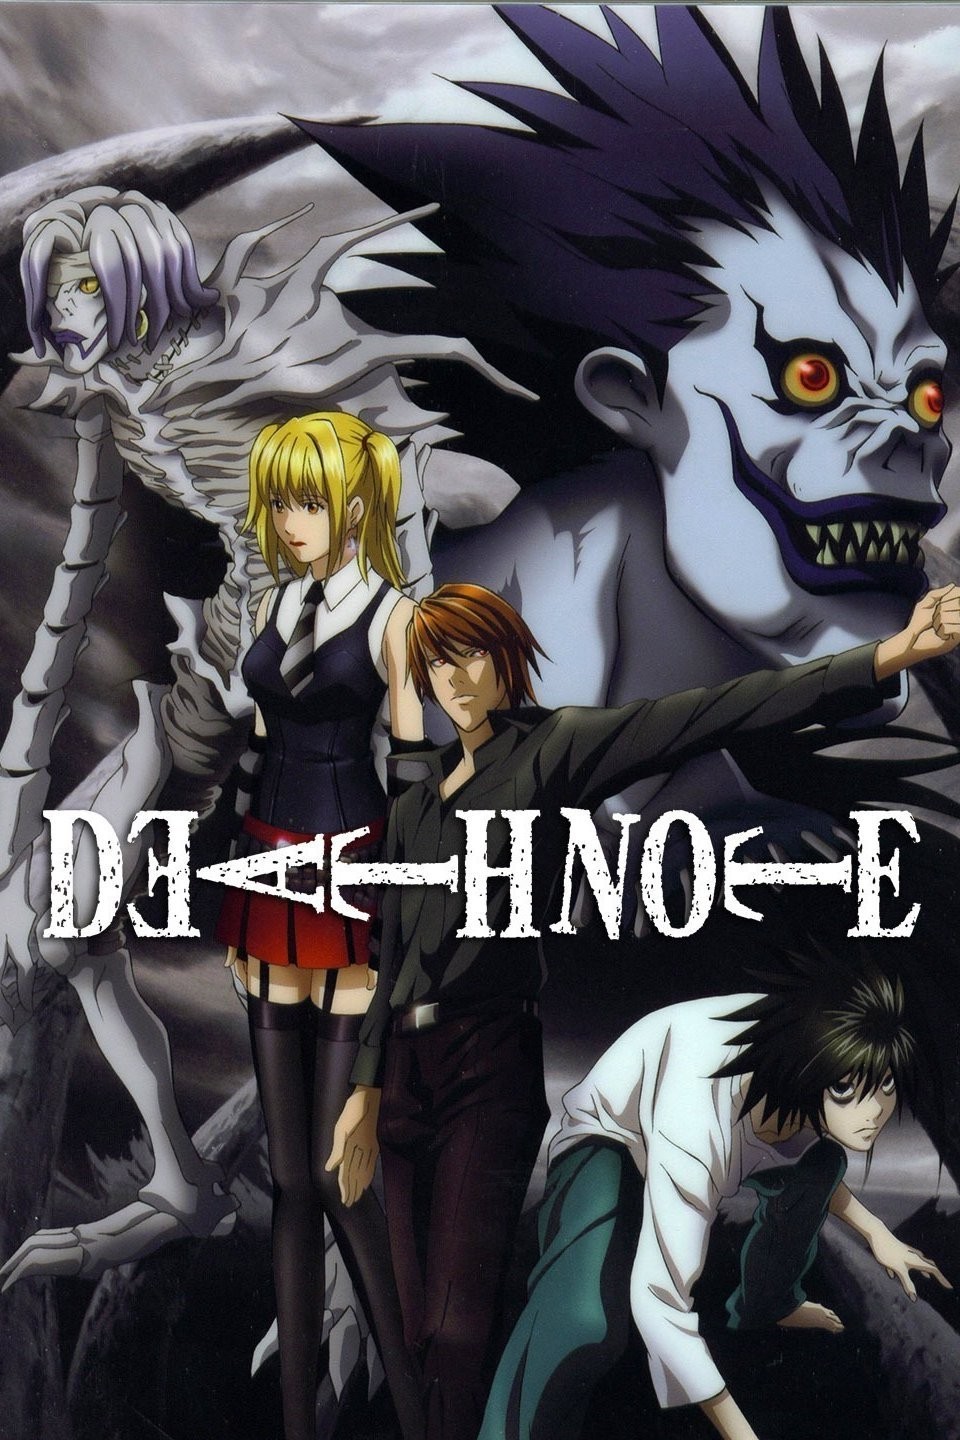 1064138 black anime Death Note Lawliet L darkness computer wallpaper  organ  Rare Gallery HD Wallpapers